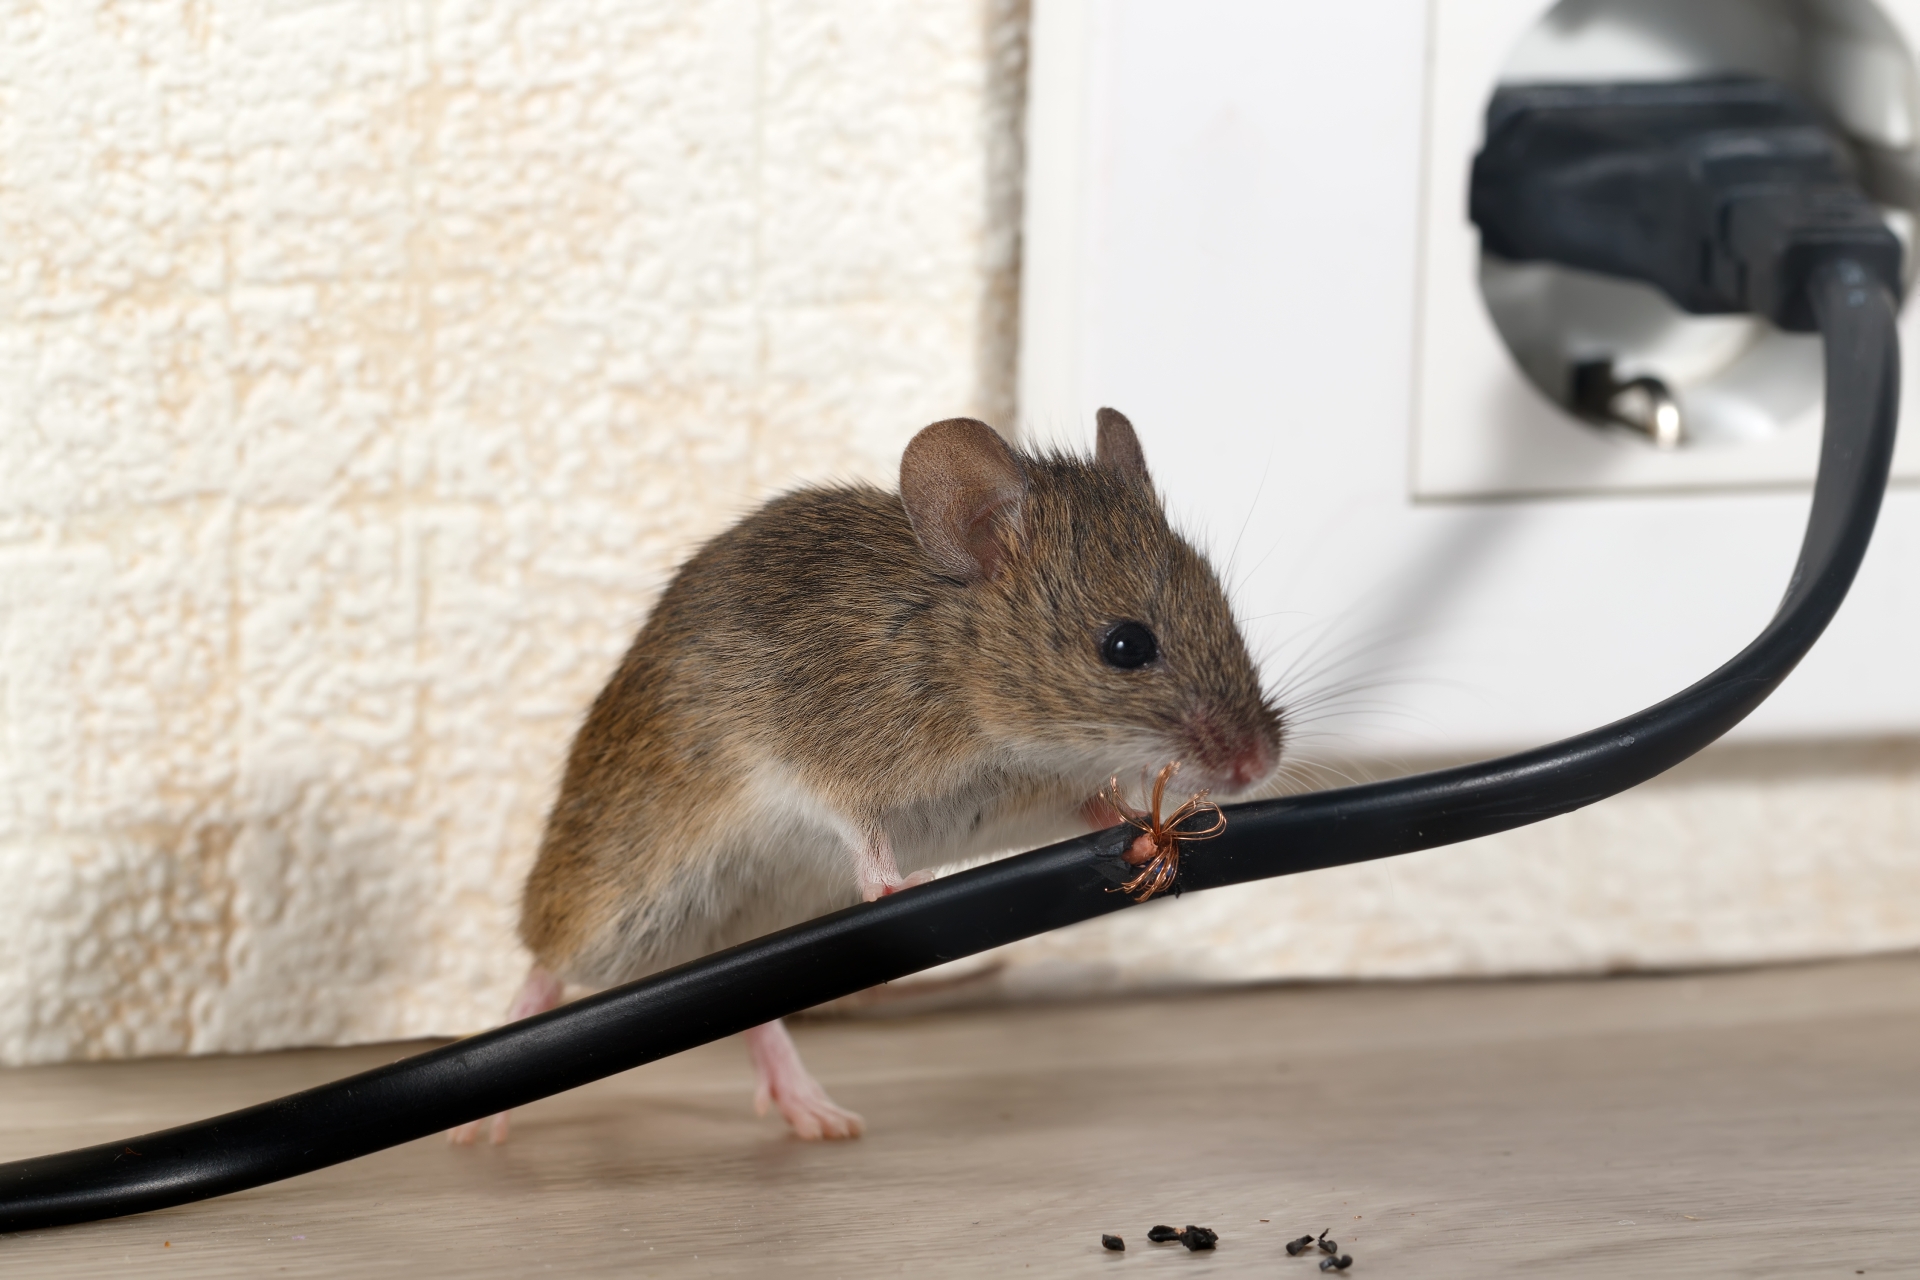 Mice Infestation, Pest Control in West Kensington, W14. Call Now 020 8166 9746